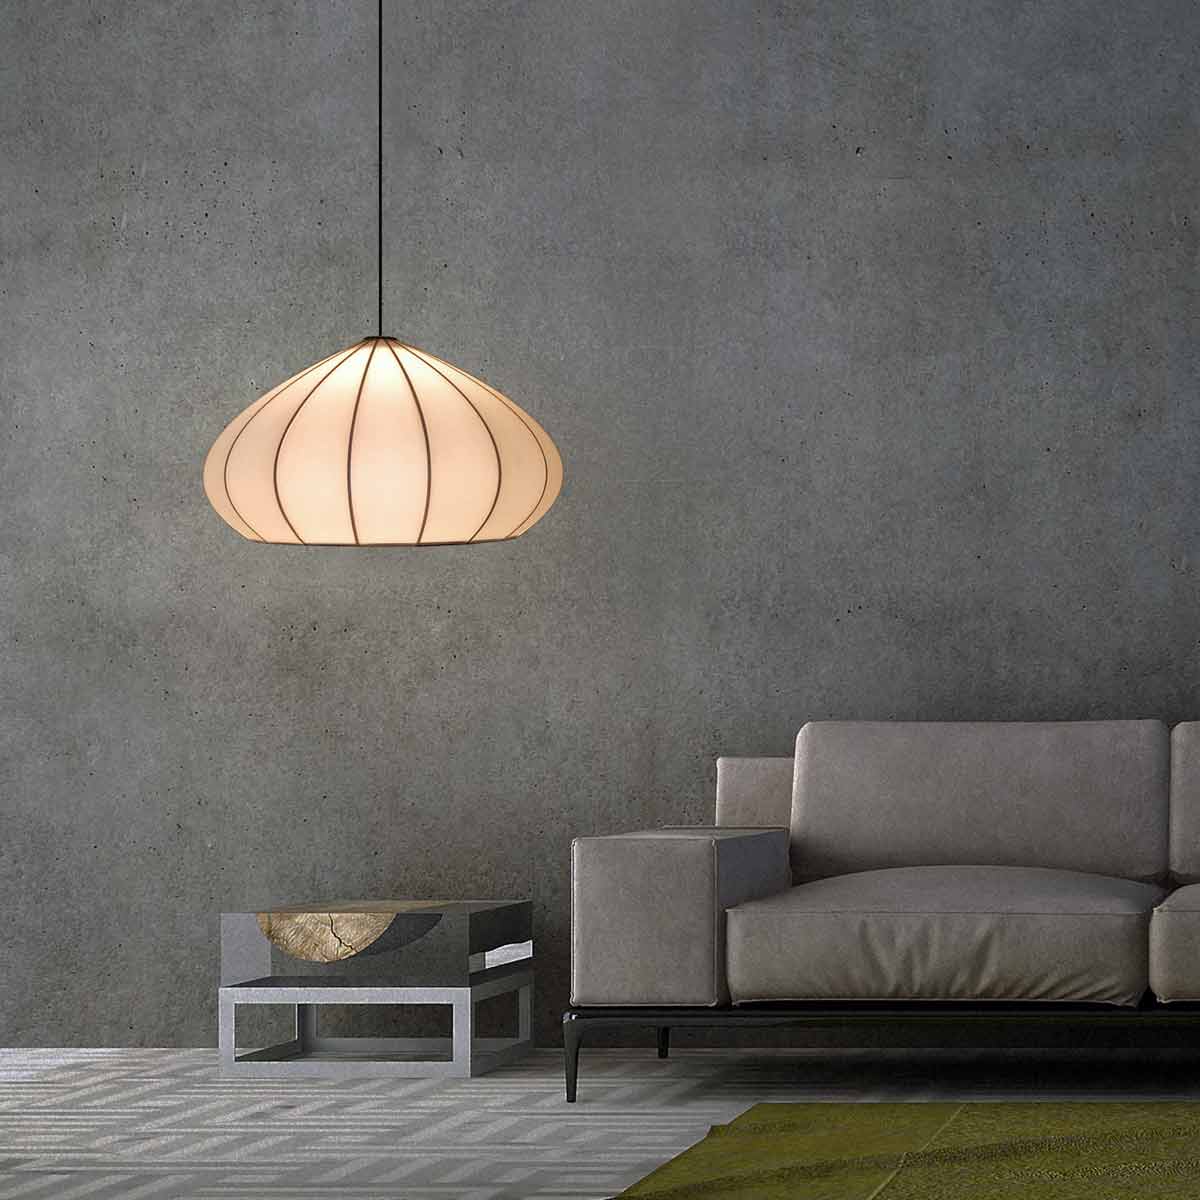 Mushroom Washi is a pendant light is a great choice for a living room